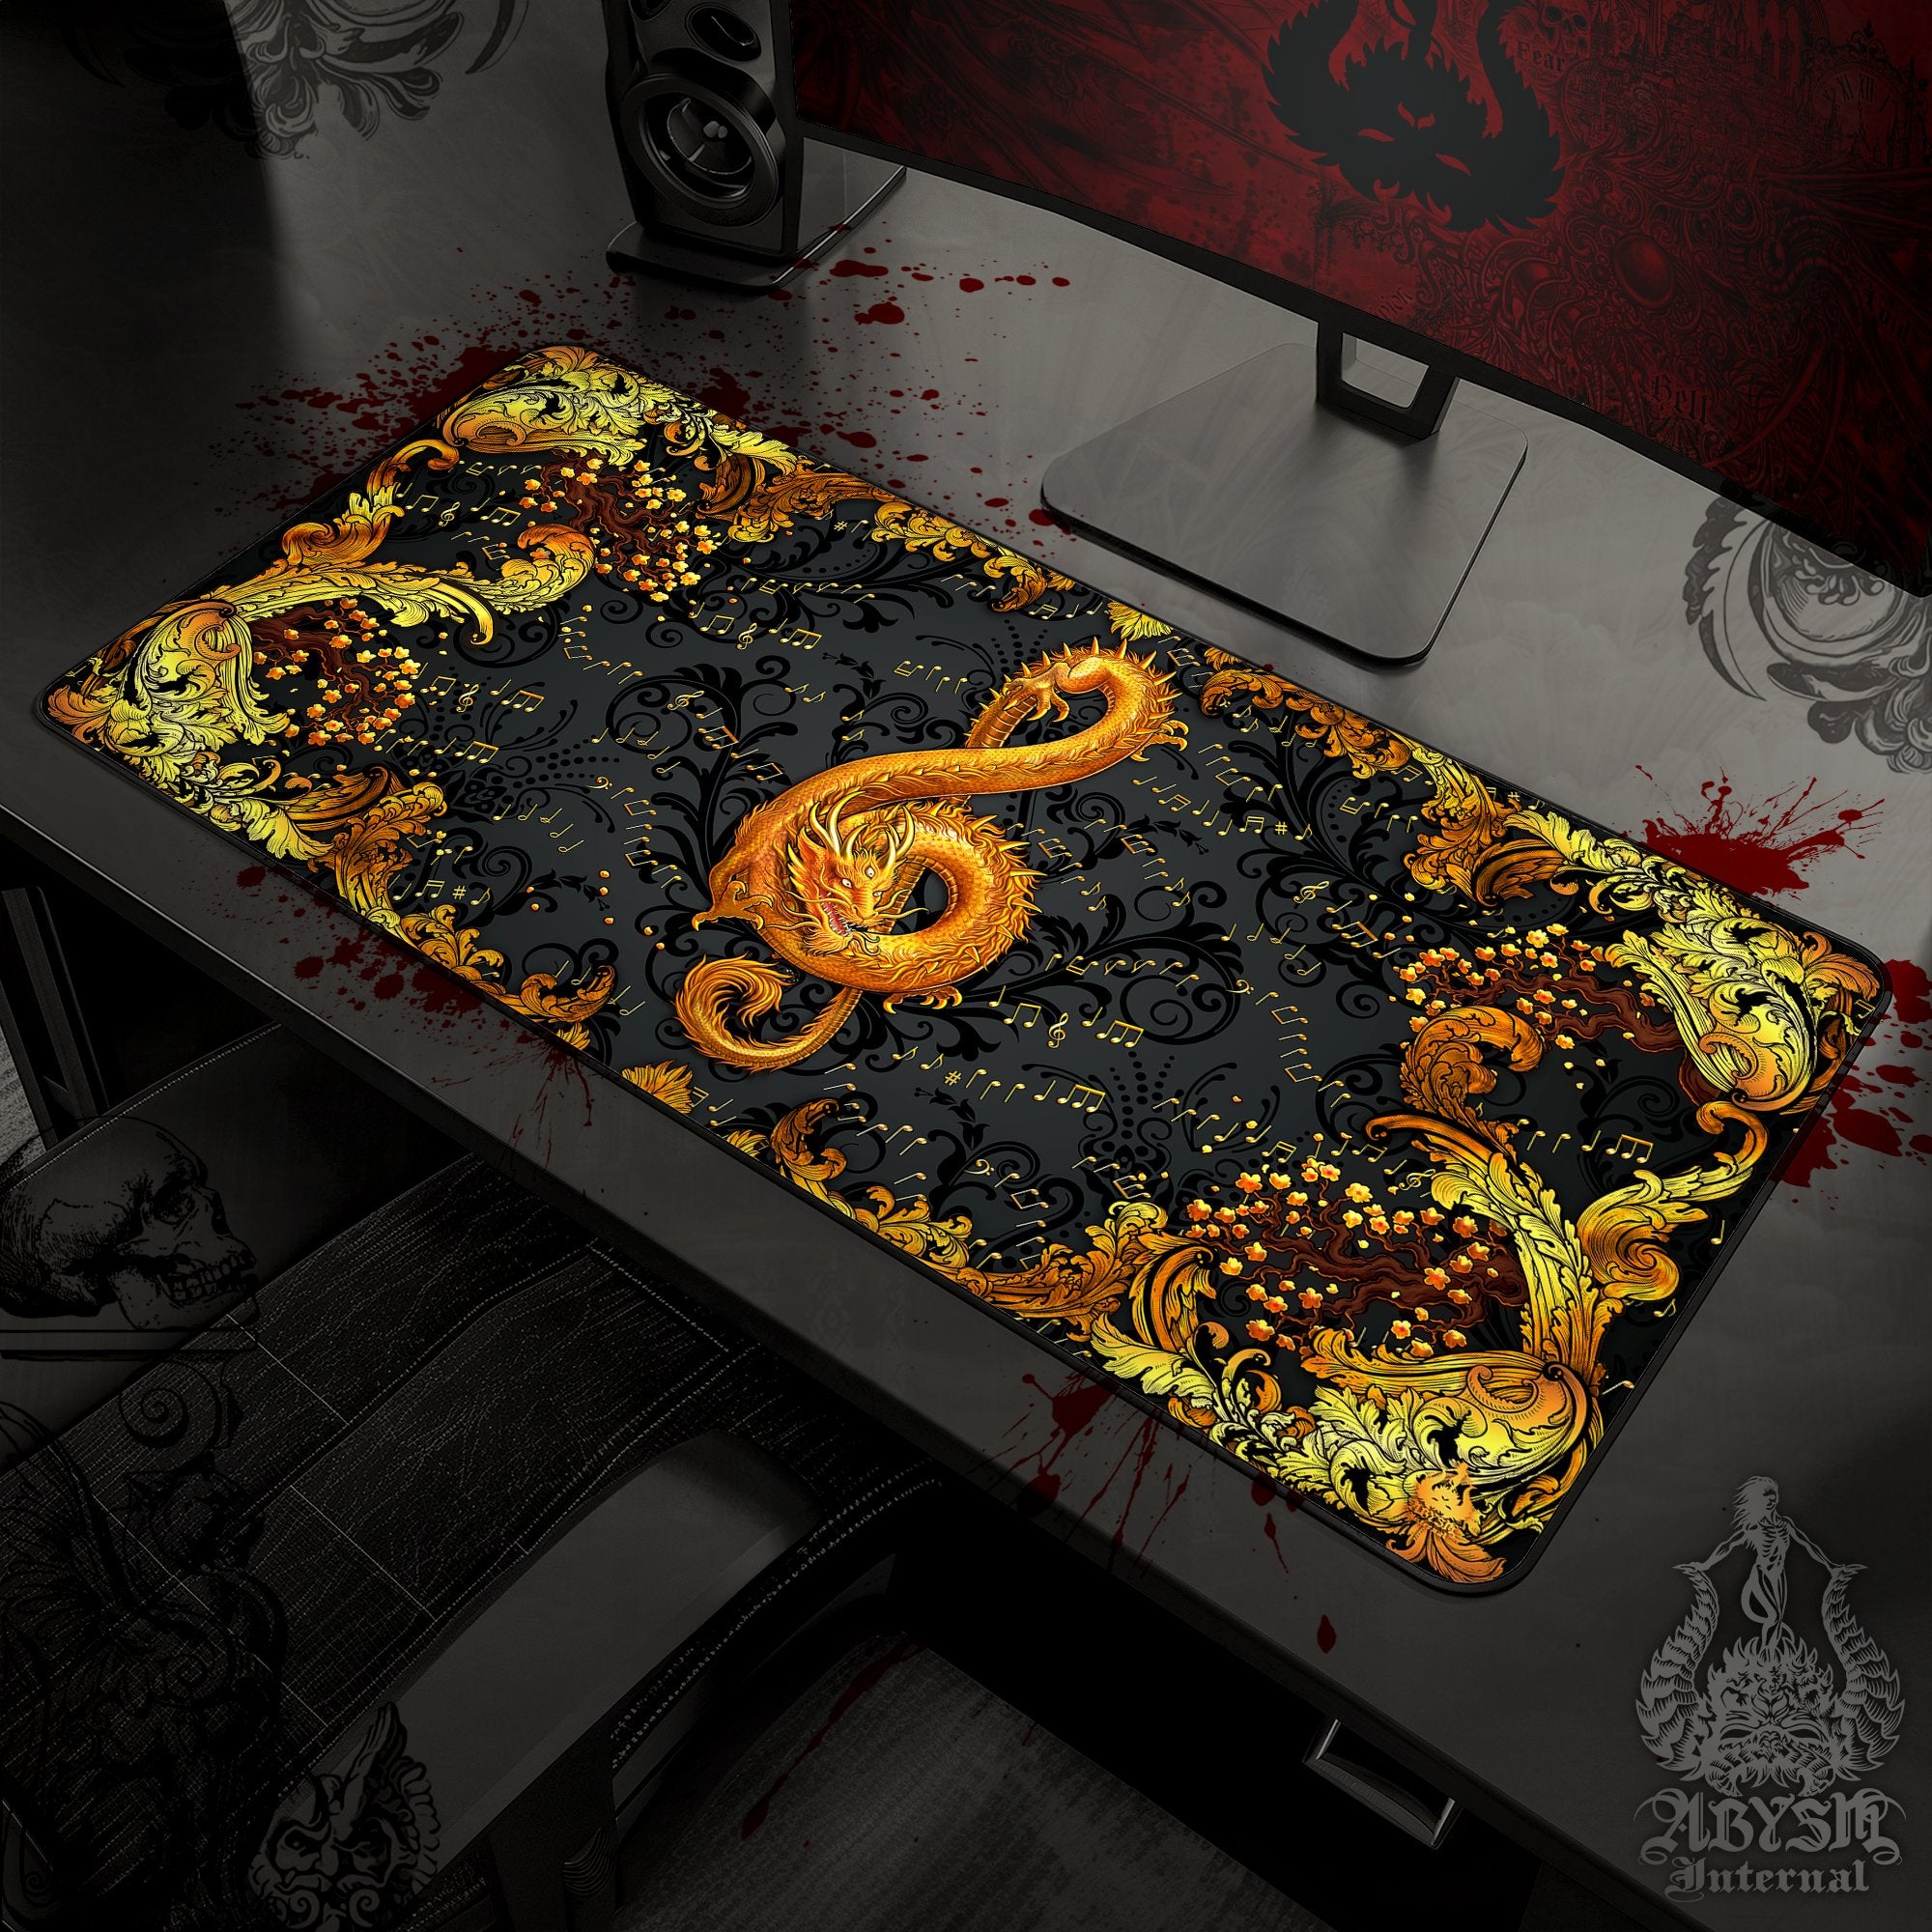 Gold Dragon Desk Mat, Music Gaming Mouse Pad, Asian Table Protector Cover, Ornamented Workpad, Treble Clef Art Print - 2 Colors - Abysm Internal